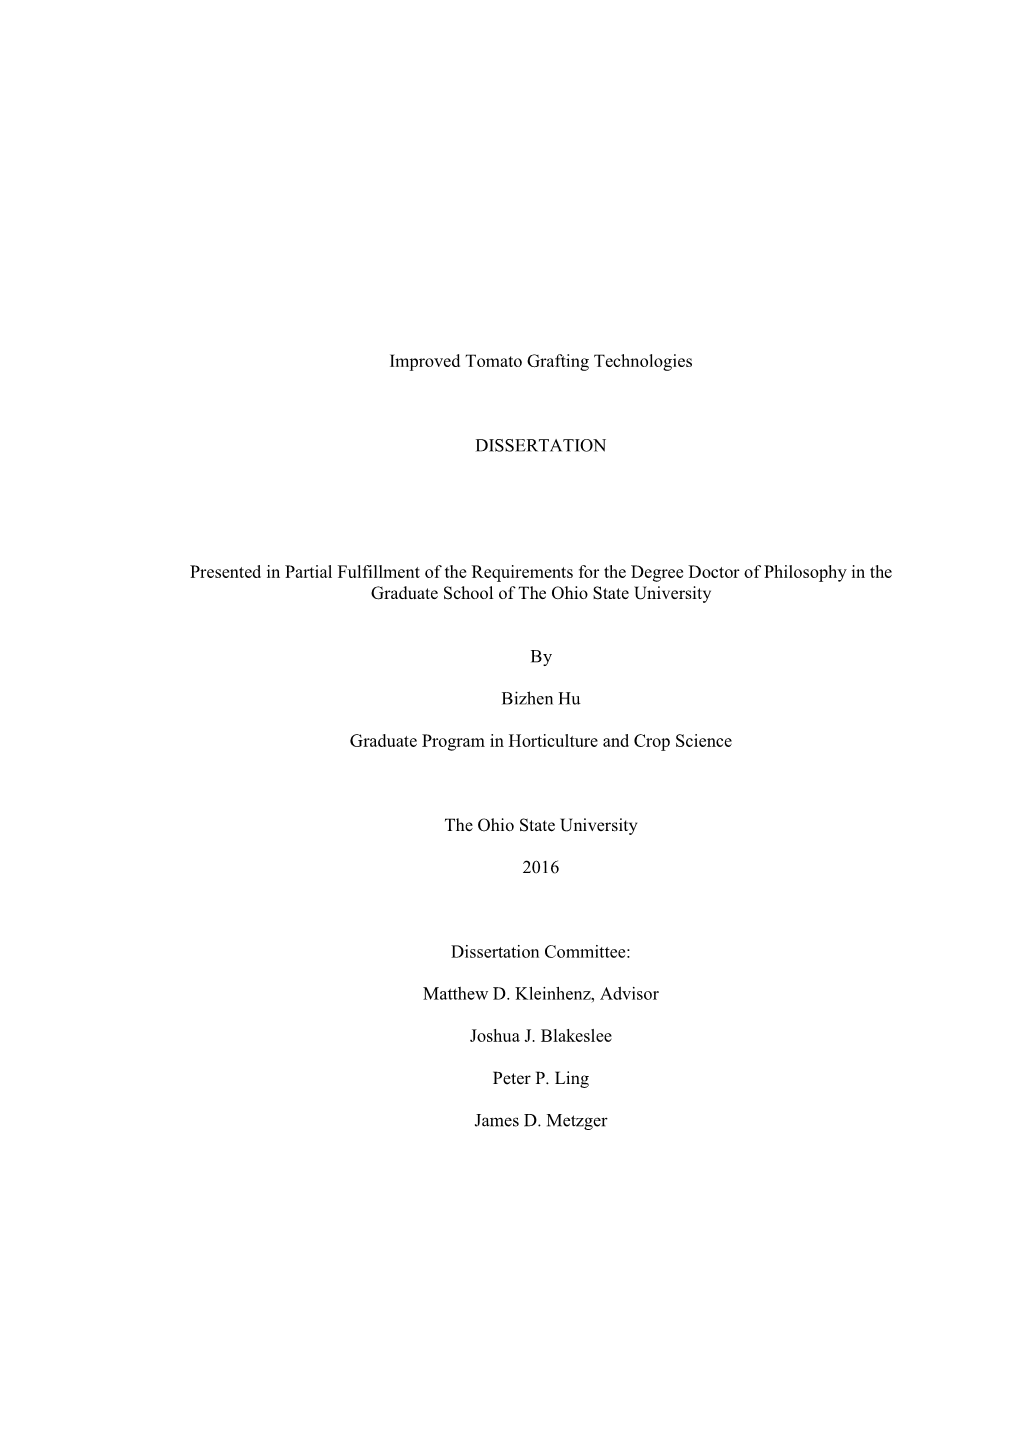 Improved Tomato Grafting Technologies DISSERTATION Presented in Partial Fulfillment of the Requirements for the Degree Doctor Of